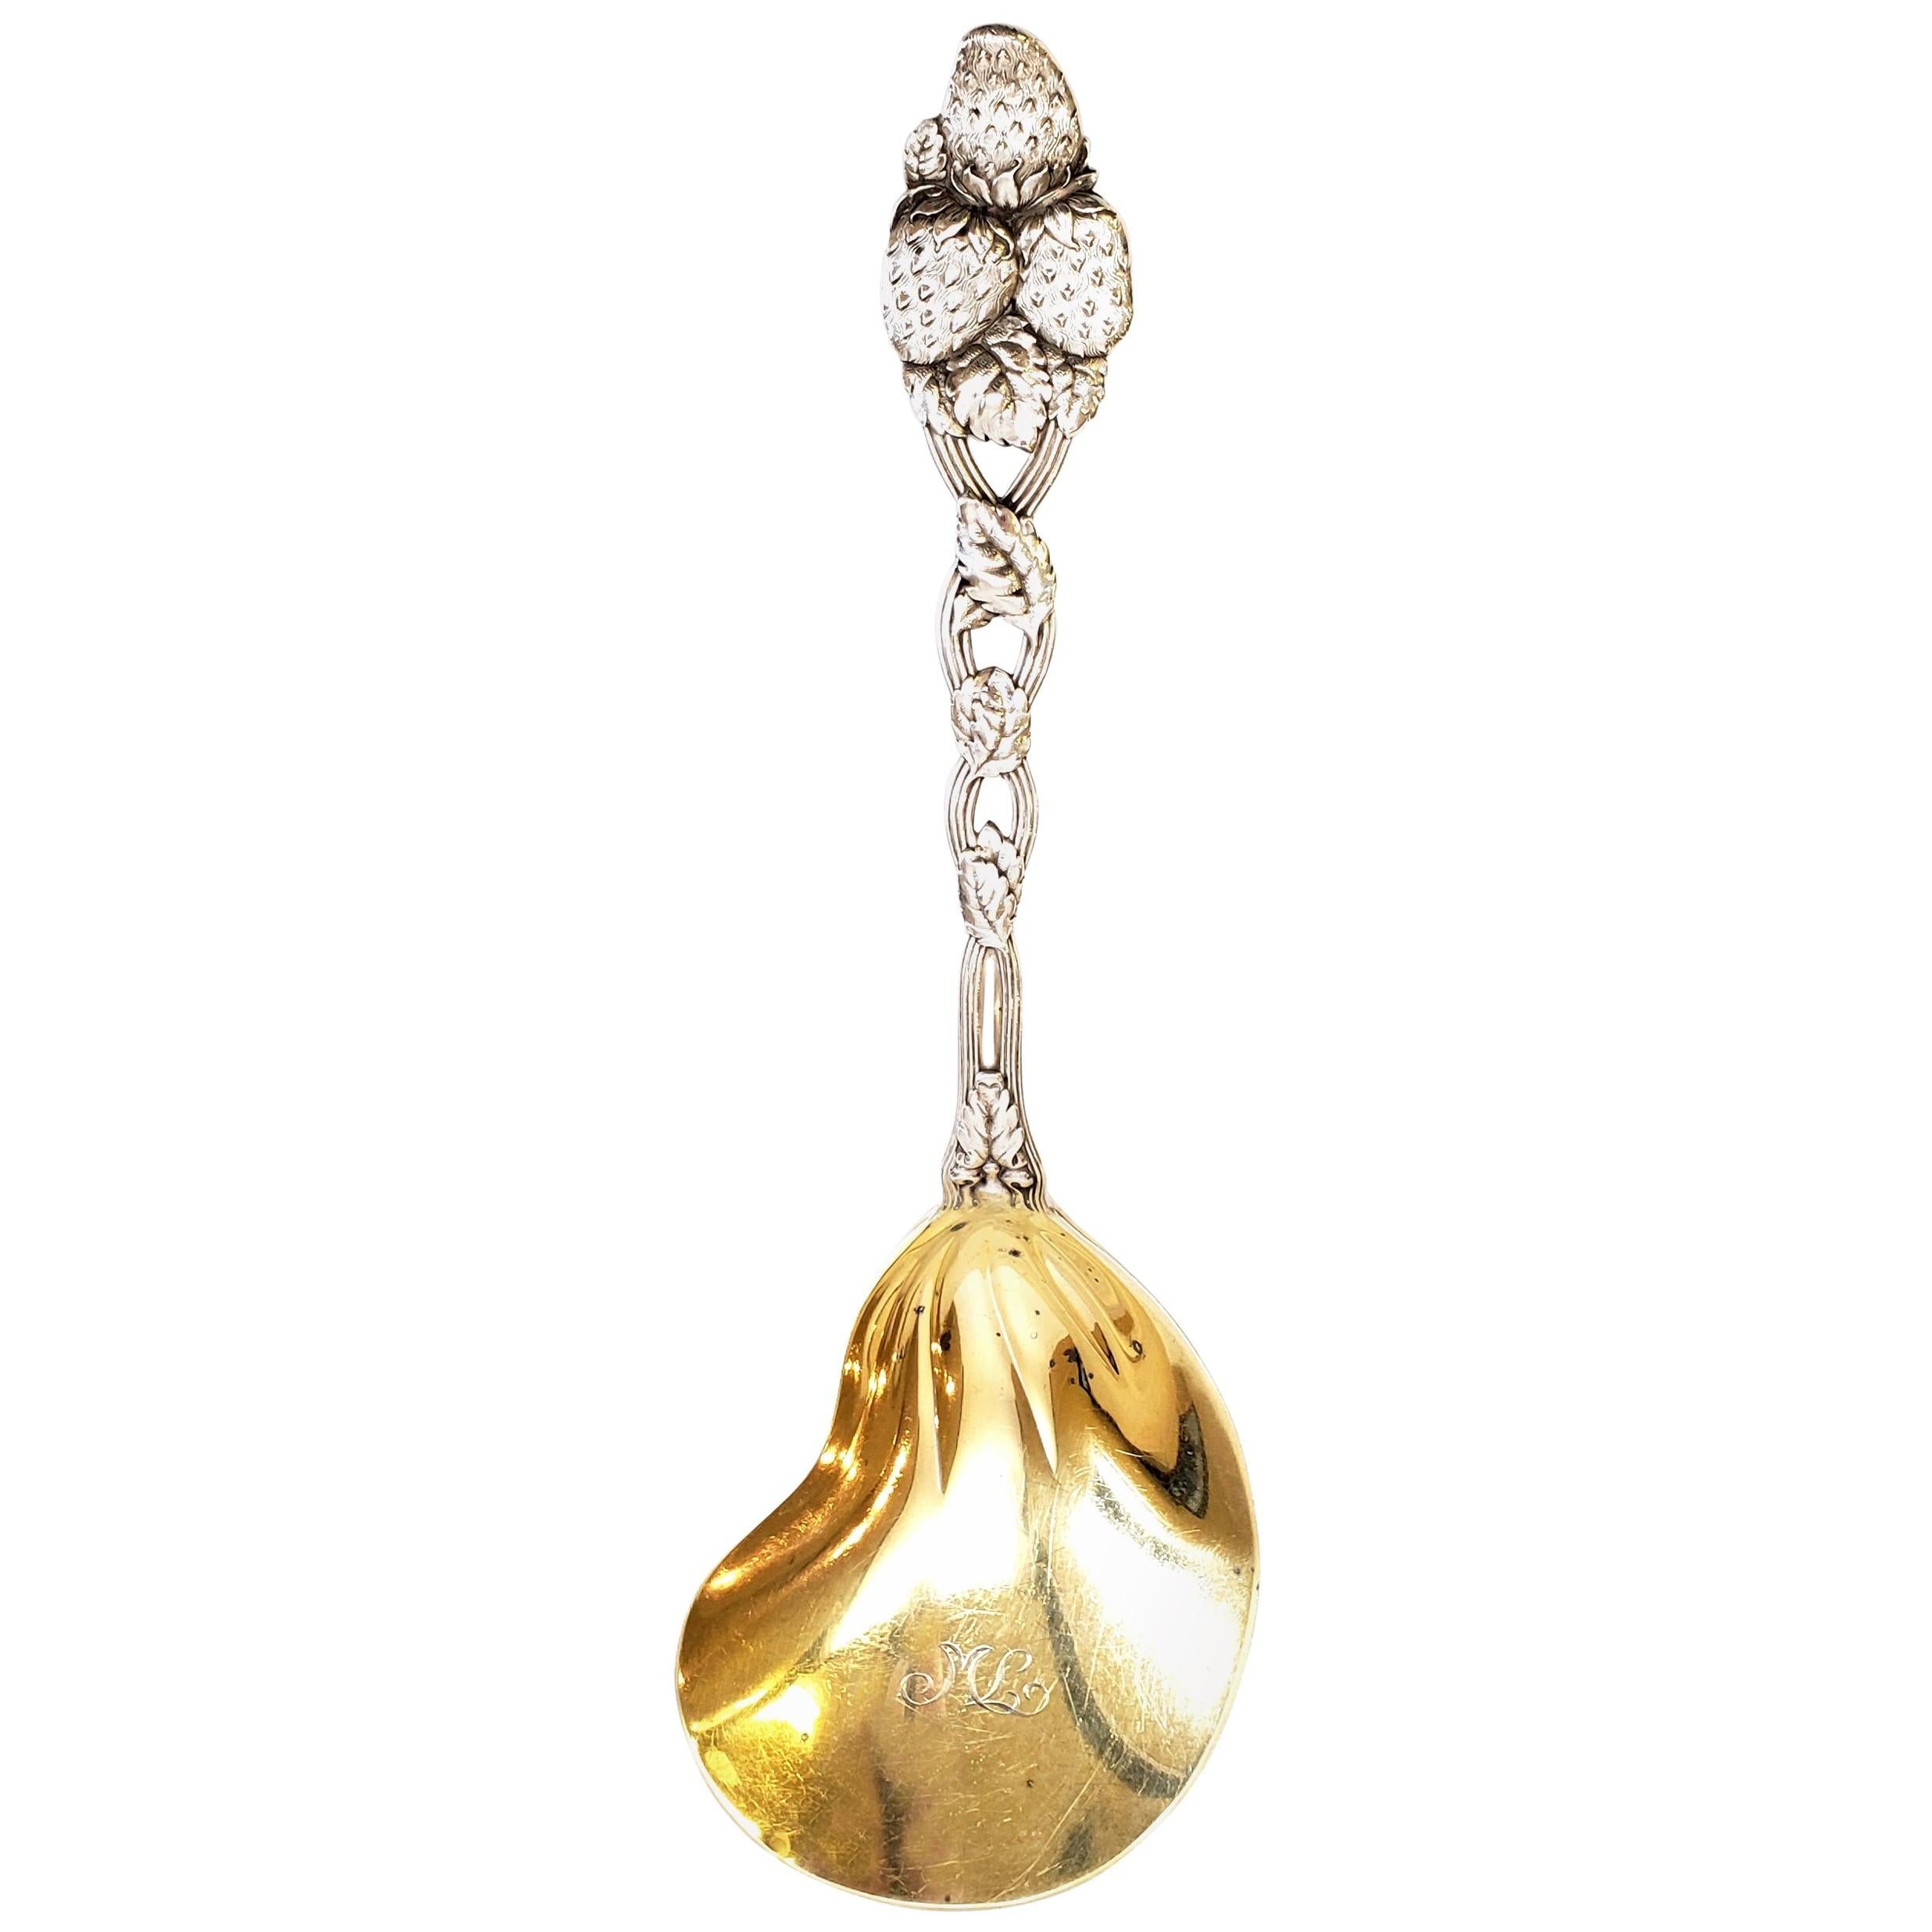 Tiffany & Co. Sterling Silver Strawberry Pattern Berry Spoon